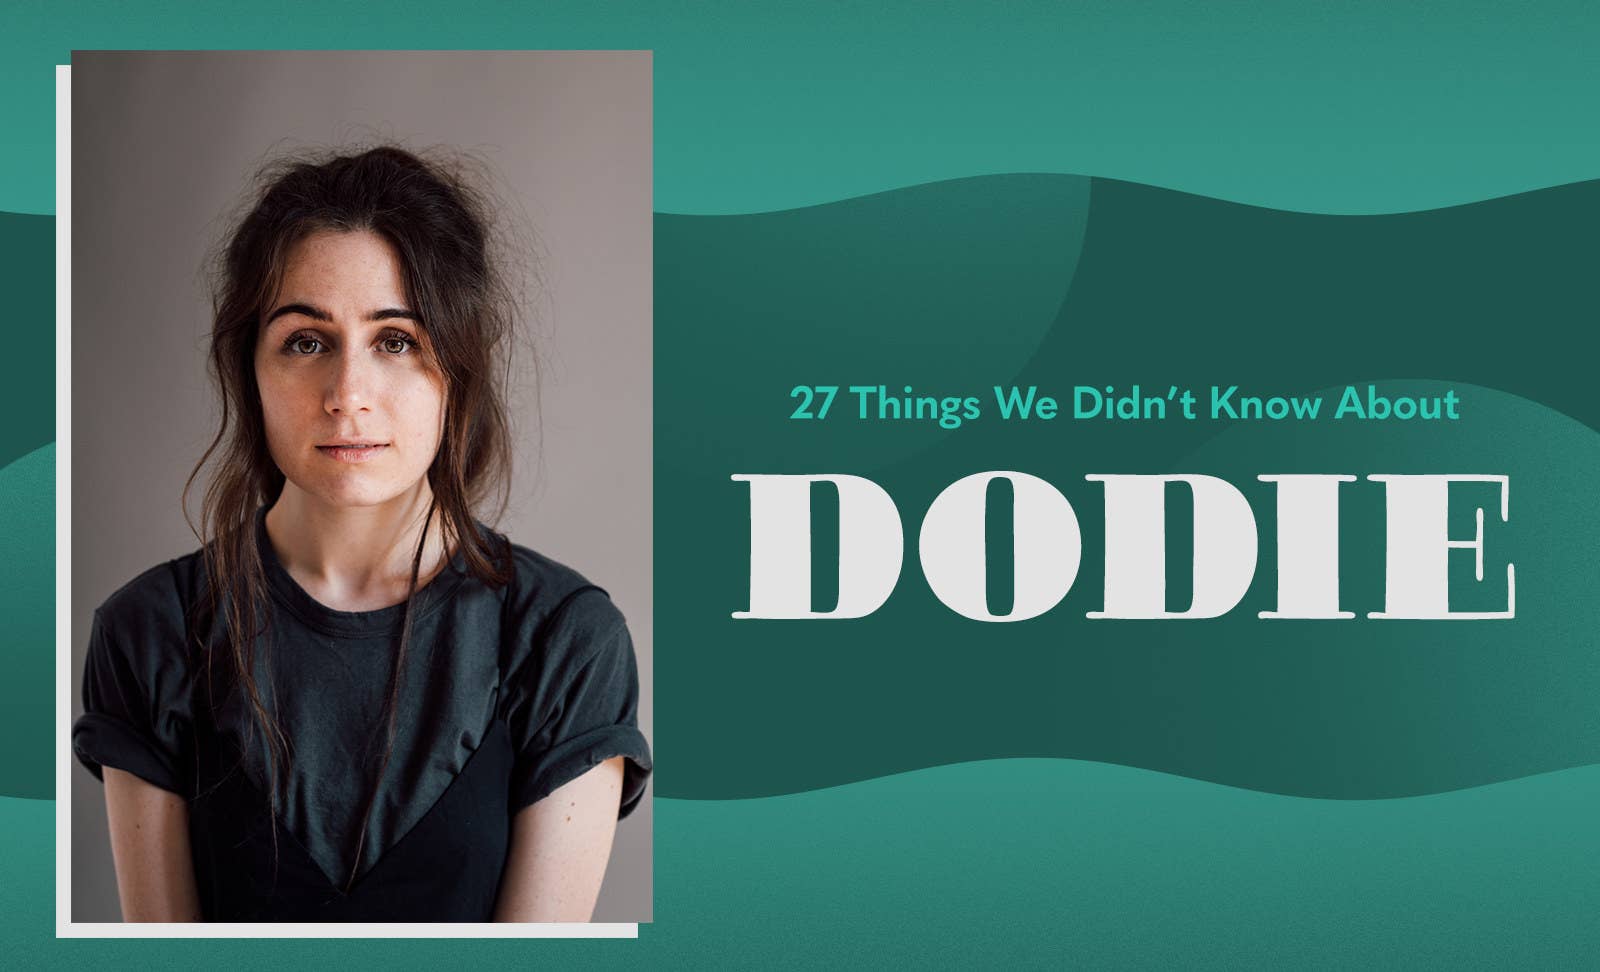 27 Facts About Dodie We Didn't Know Until Now